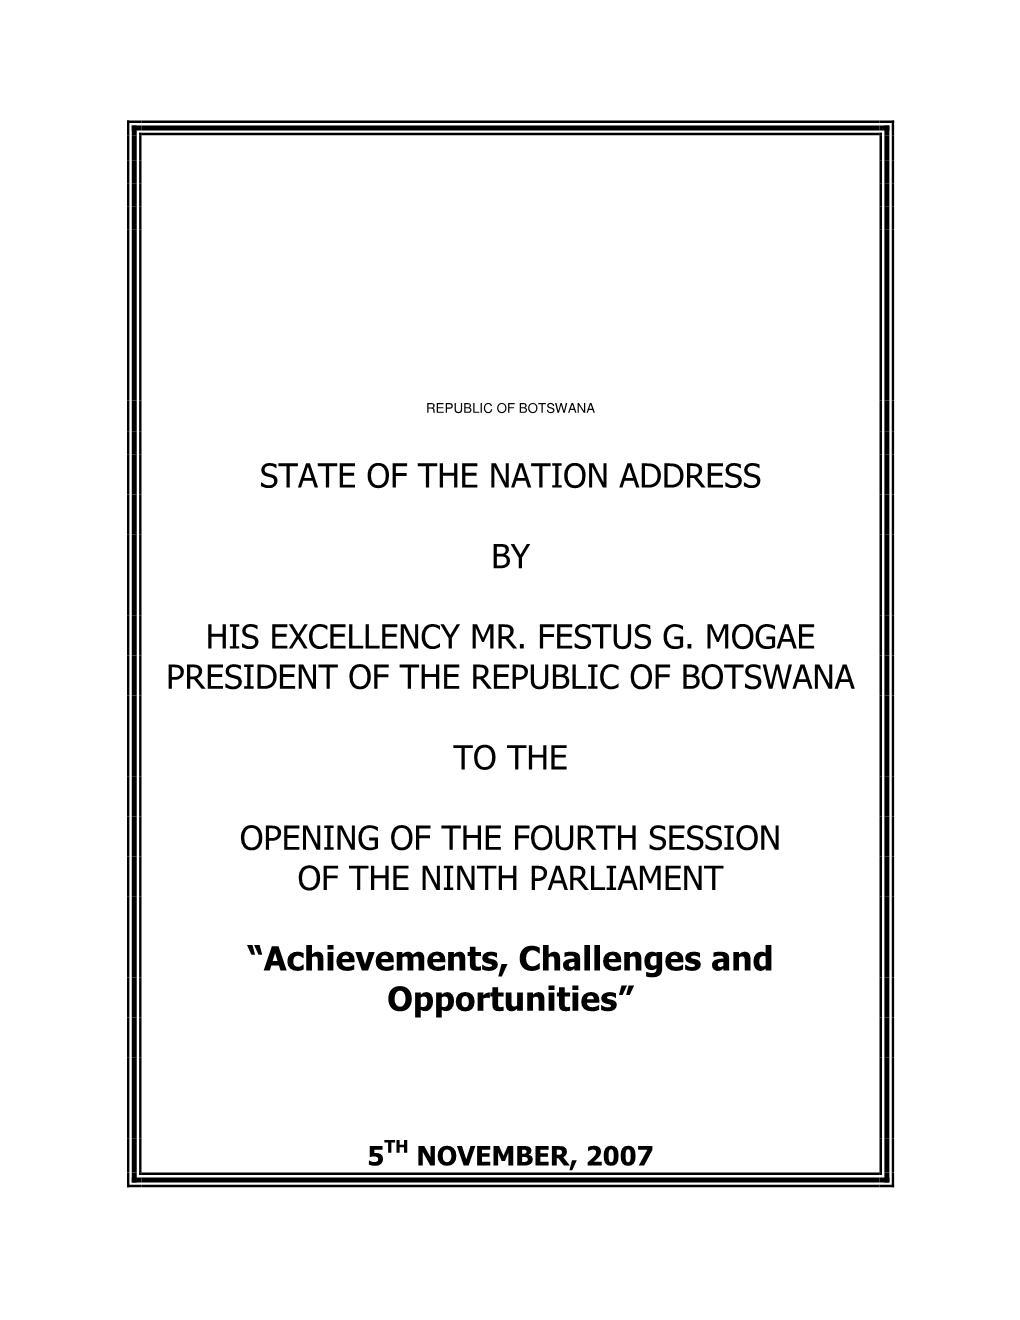 State of the Nation Address by His Excellency Mr